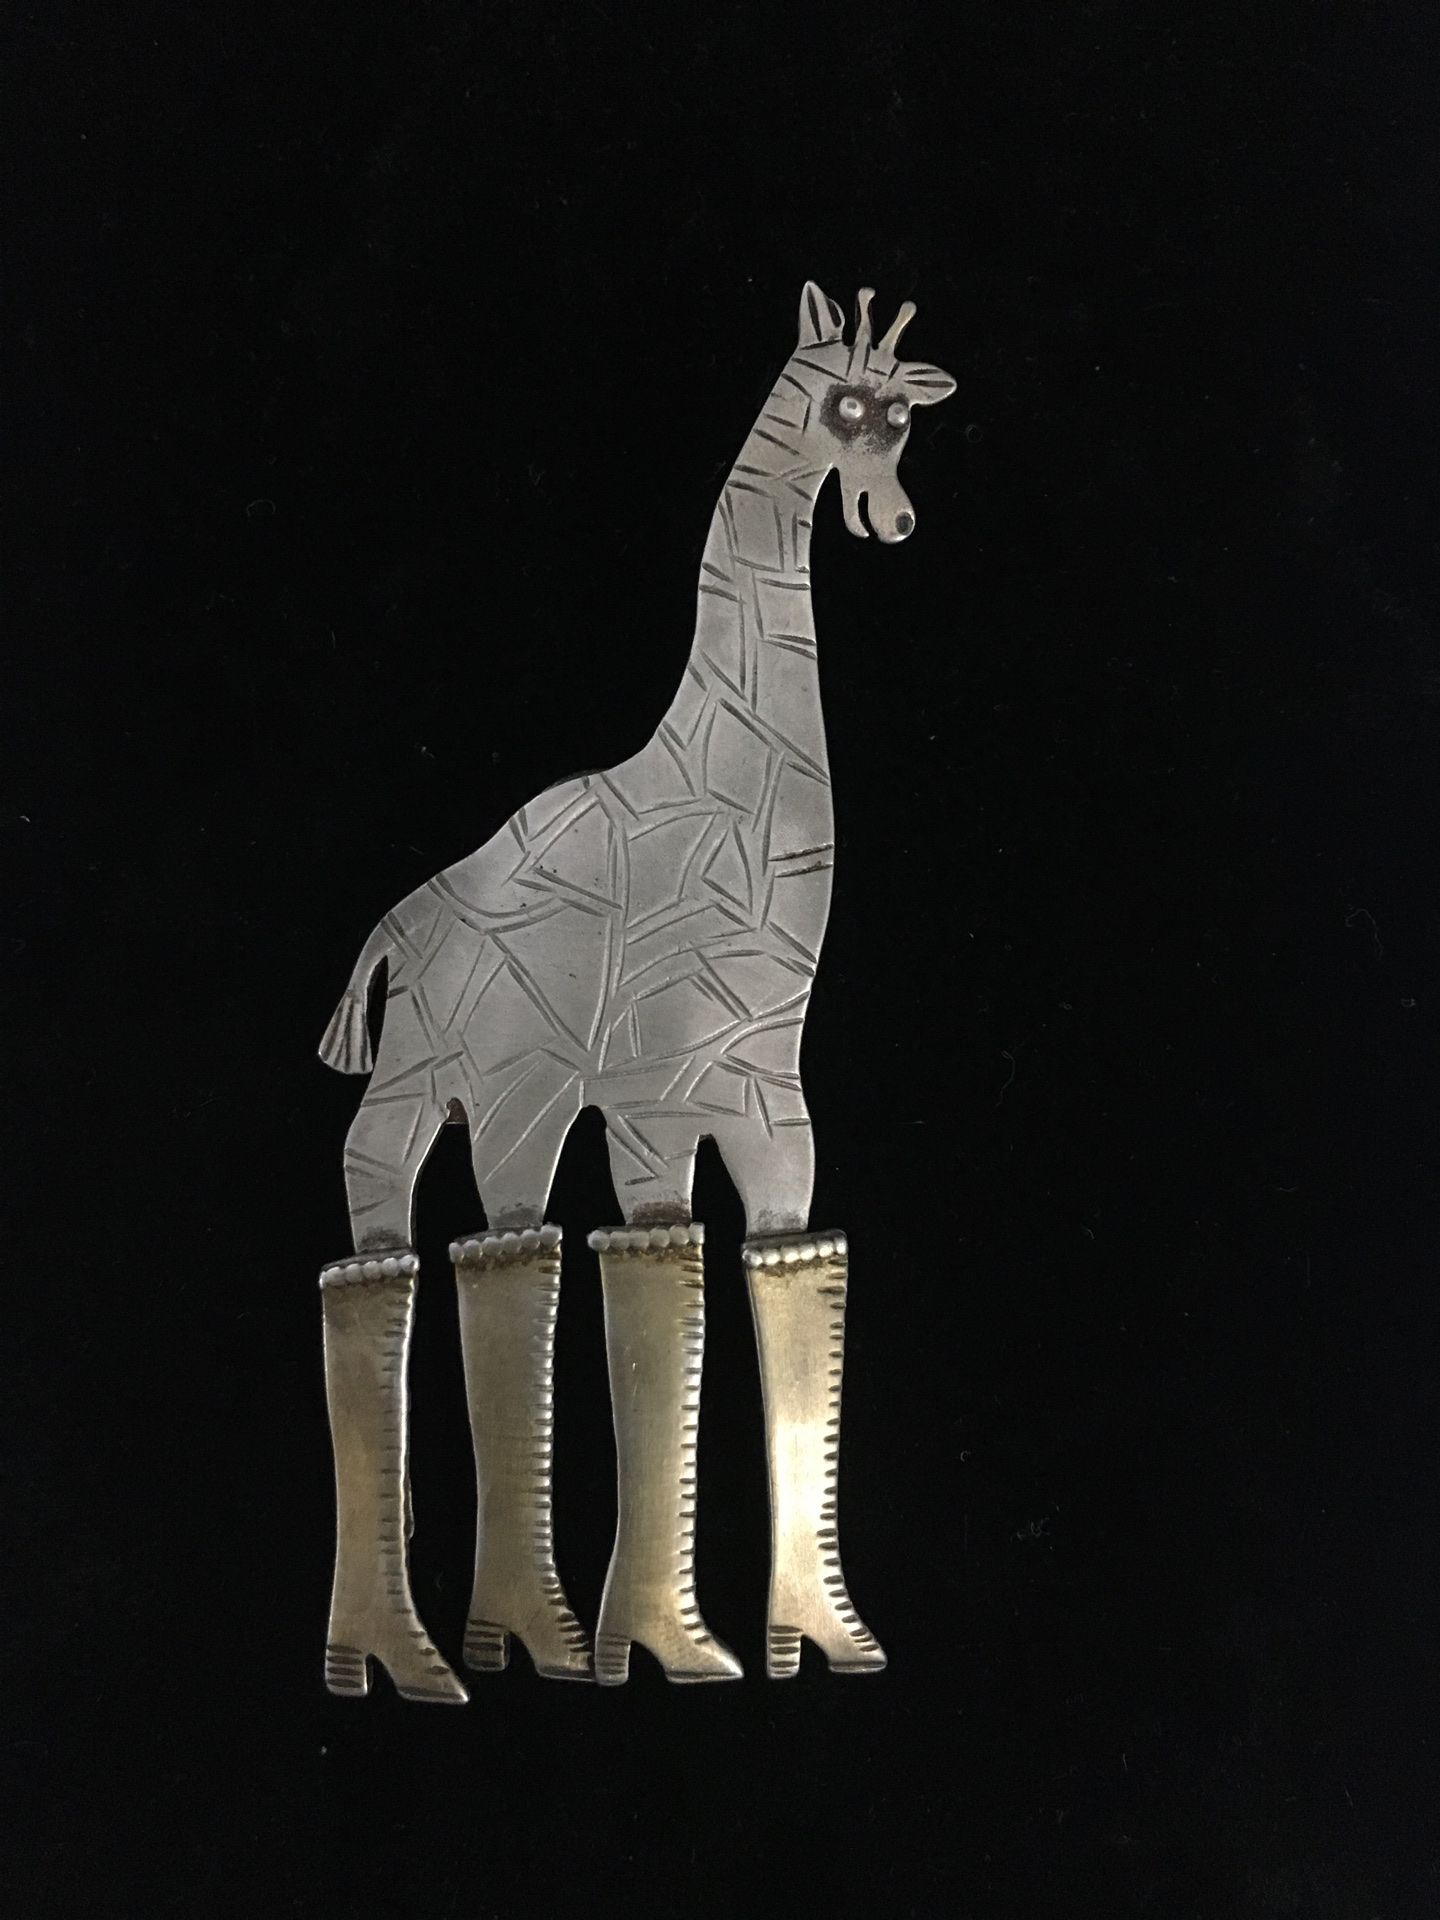 Vintage Limited Edition Signed DB Giraffe In Boots Brooch, Pin- Appraised at $80 - 2 Toned, etched- Nice Find! Listing Hundreds Of Items